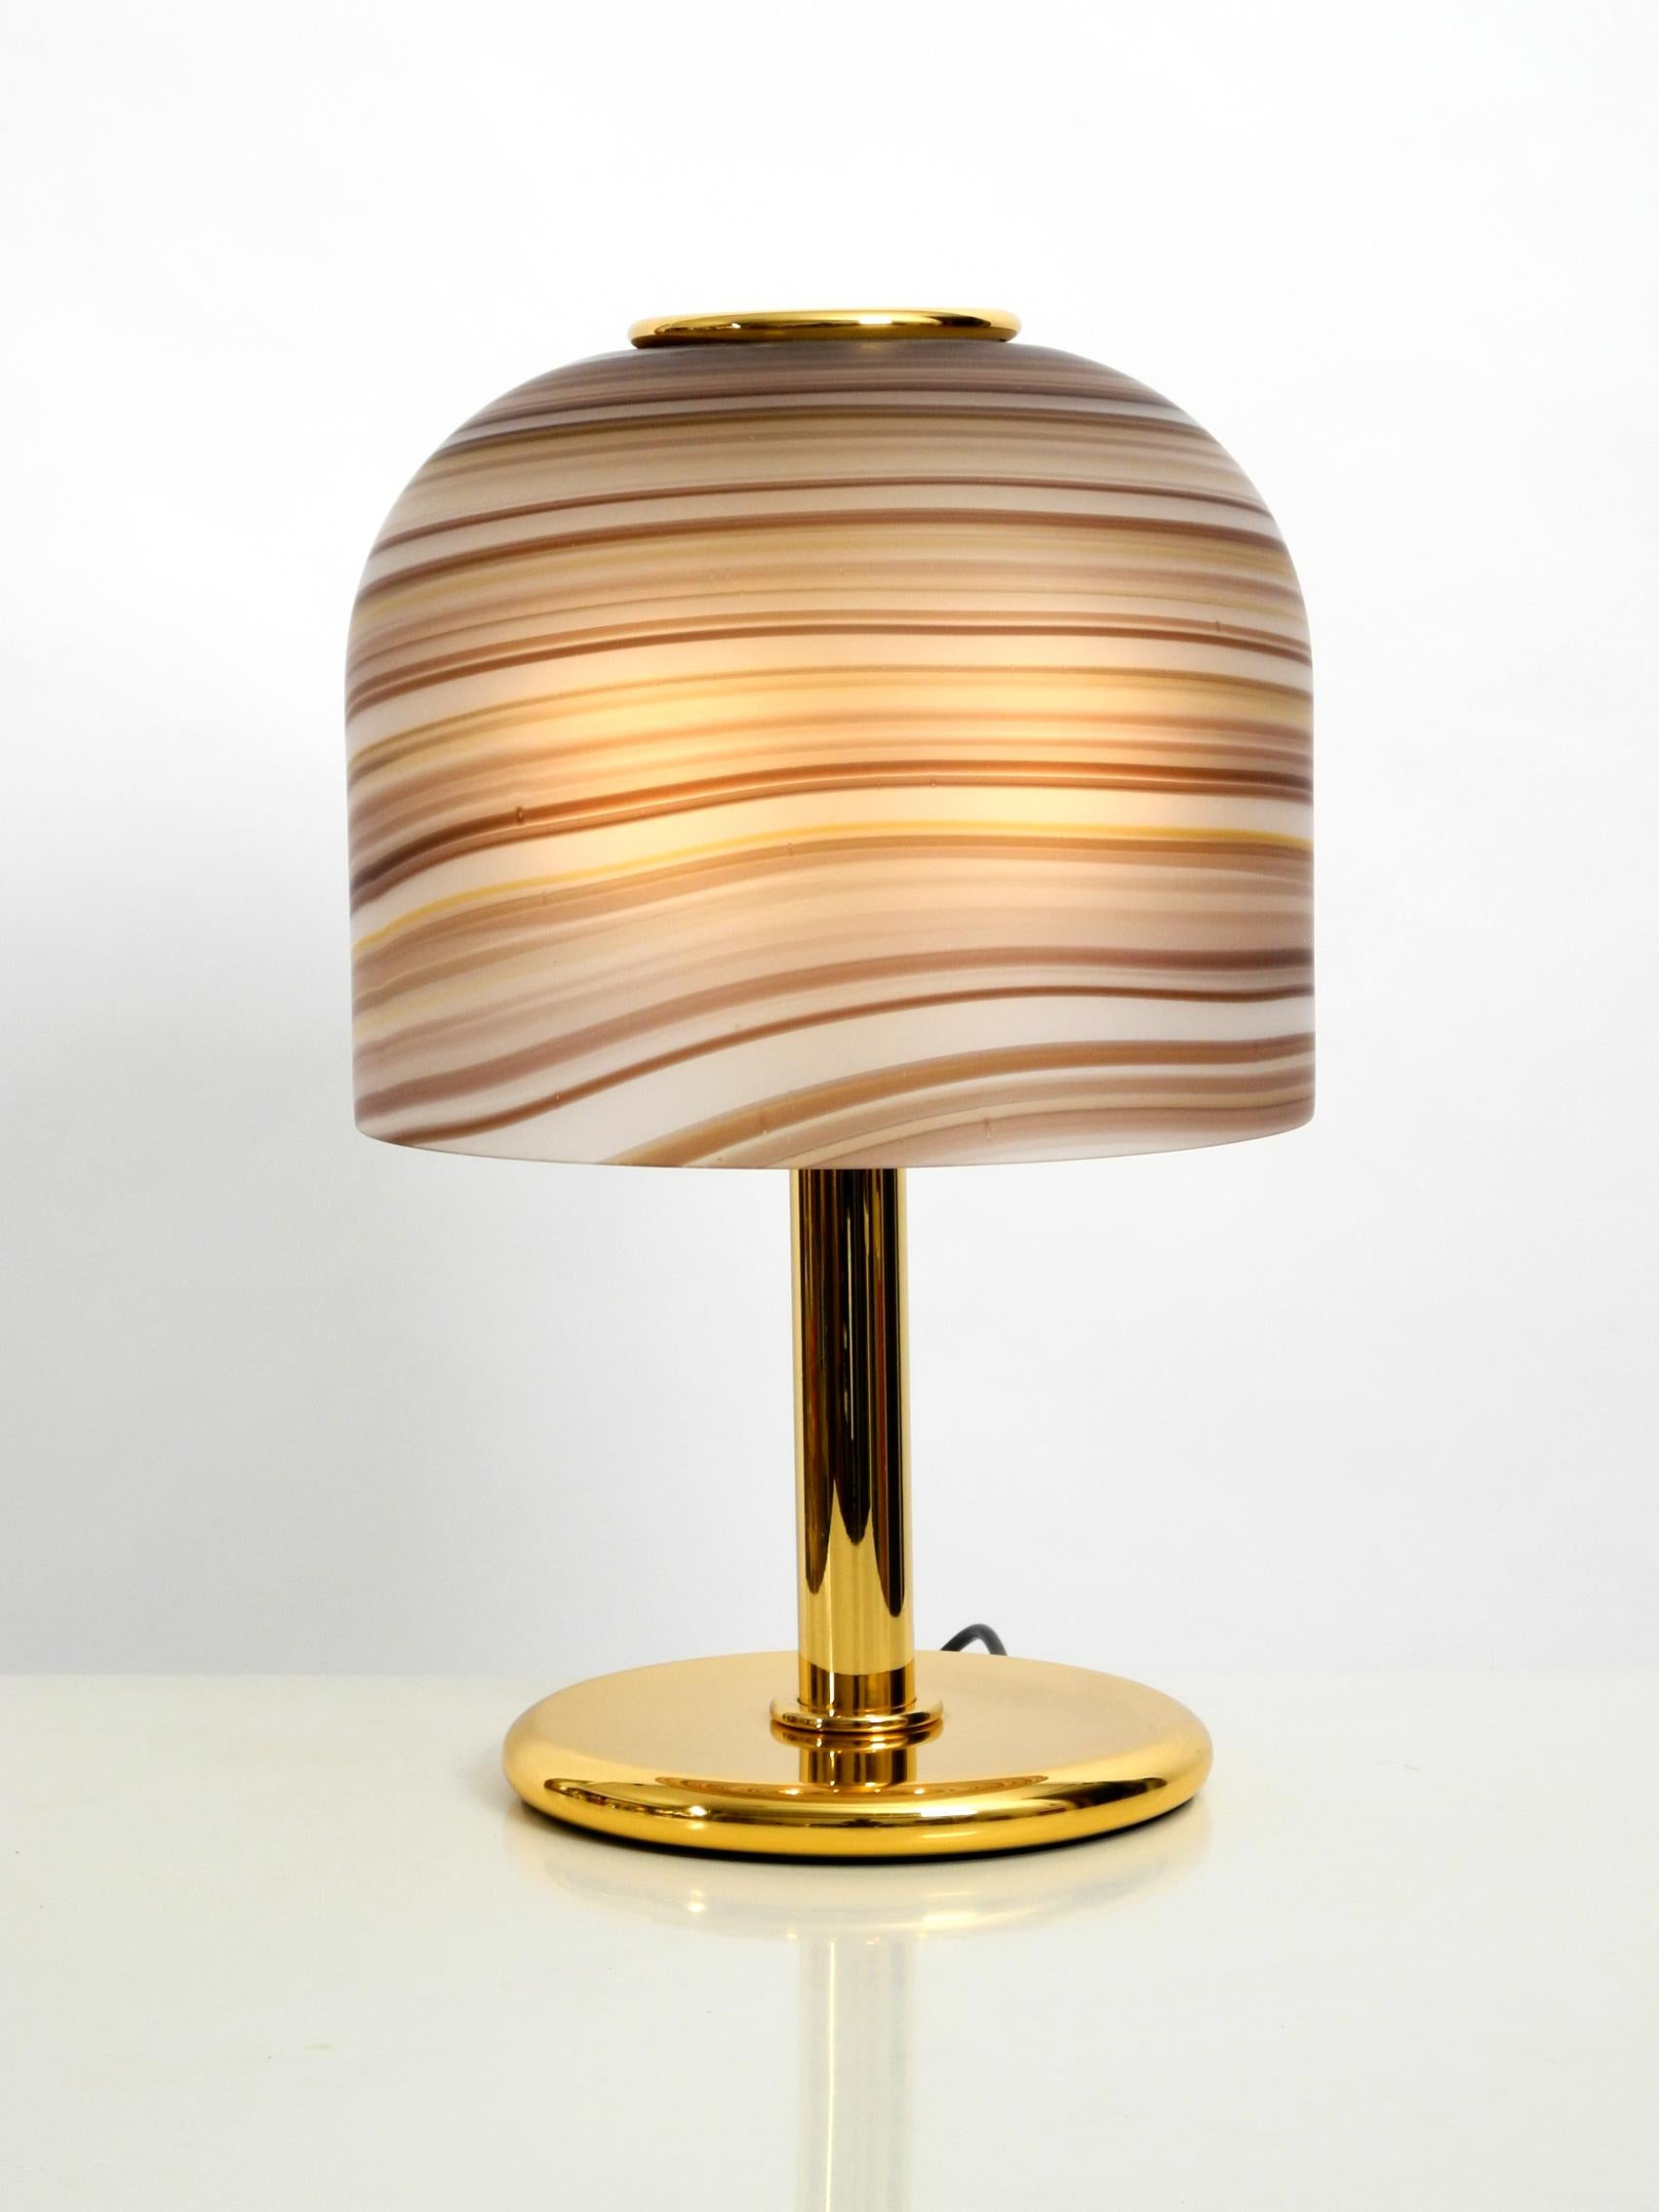 Gorgeous 1970s XL italian table lamp. Very heavy brass base with very high quality glass shade with brown shaded stripes. Very elegant seventies design in good vintage condition. Pleasant, warm, glare-free light. Two original E27 sockets. No damages